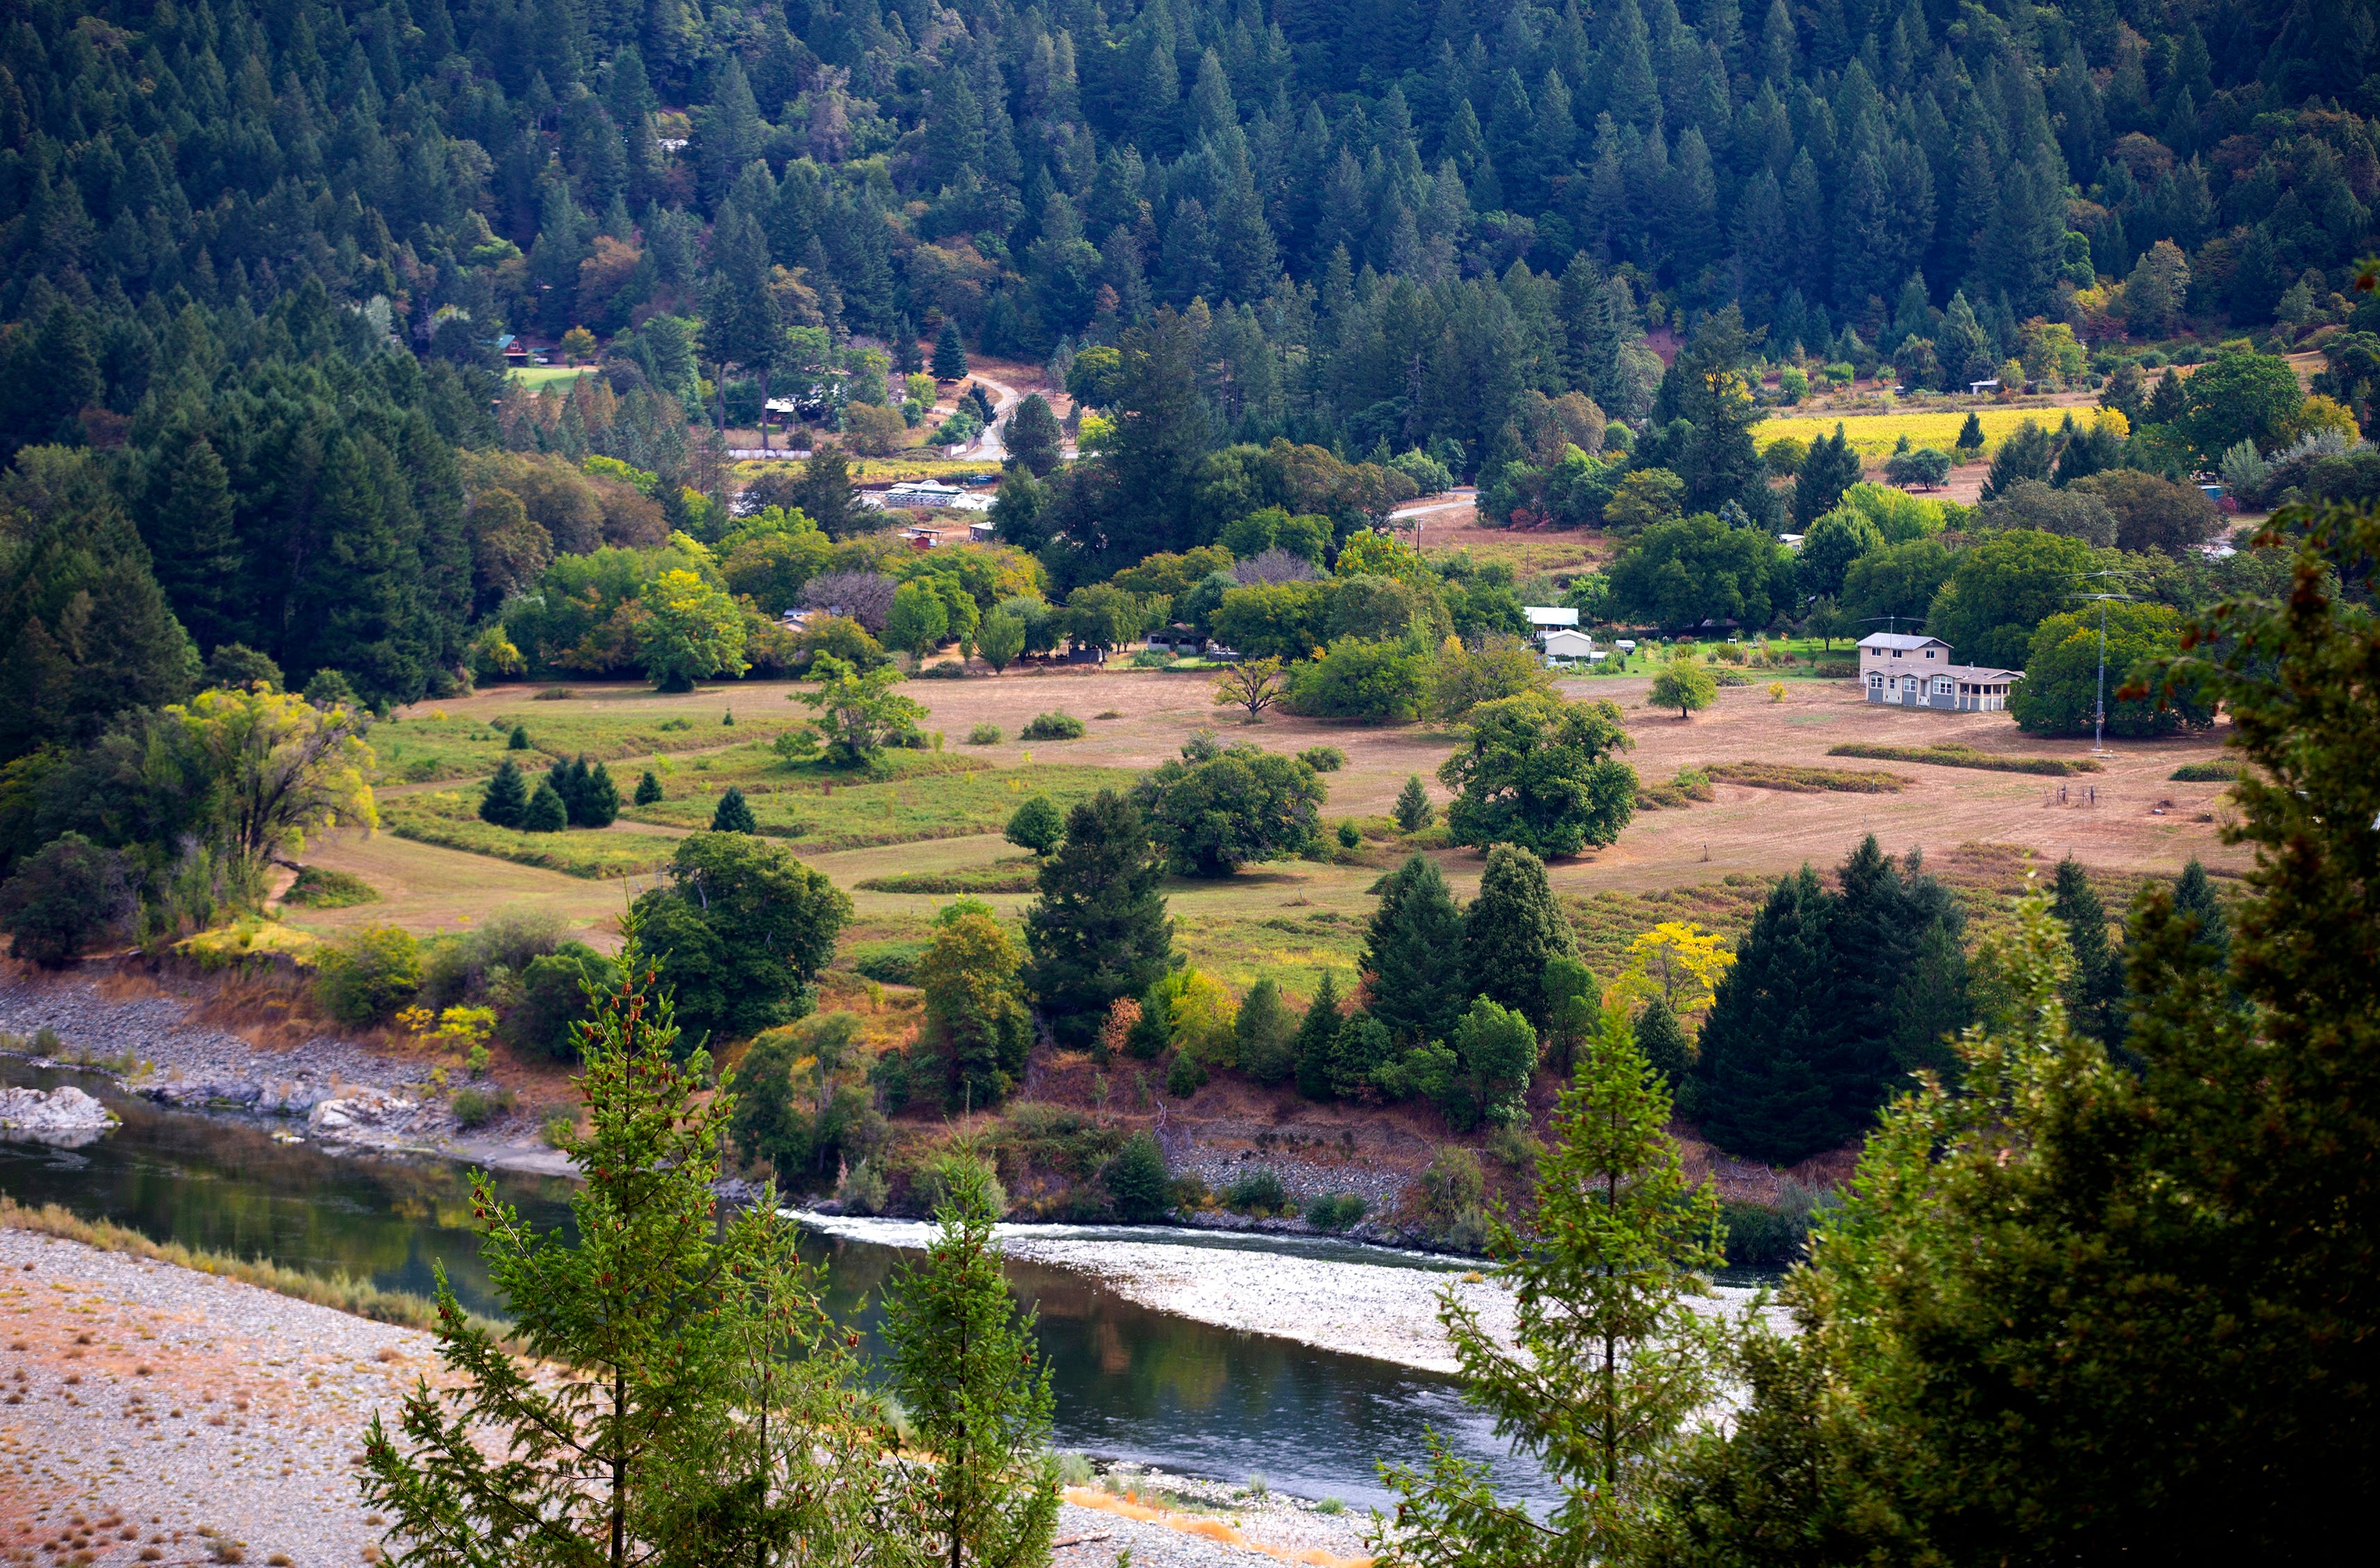 What the Karuk tribe describes as a "Douglas fir plantation" and not a natural landscape grows along the river in Orleans, California.